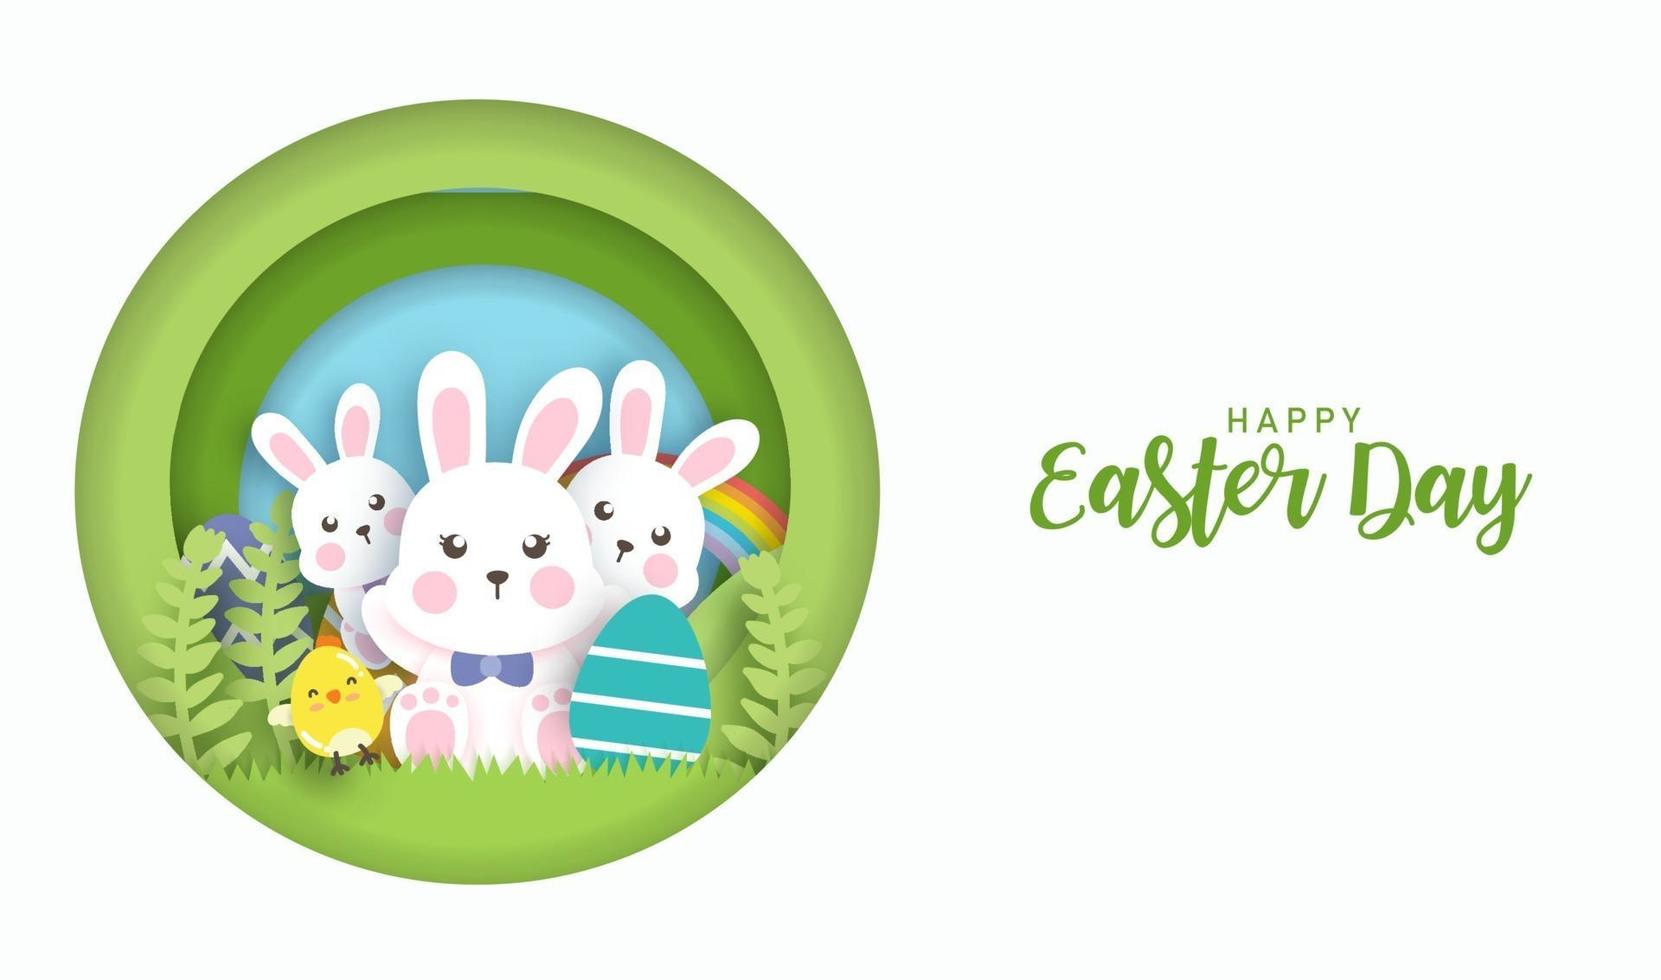 Easter day background and banner with cute rabbits and easter eggs. vector